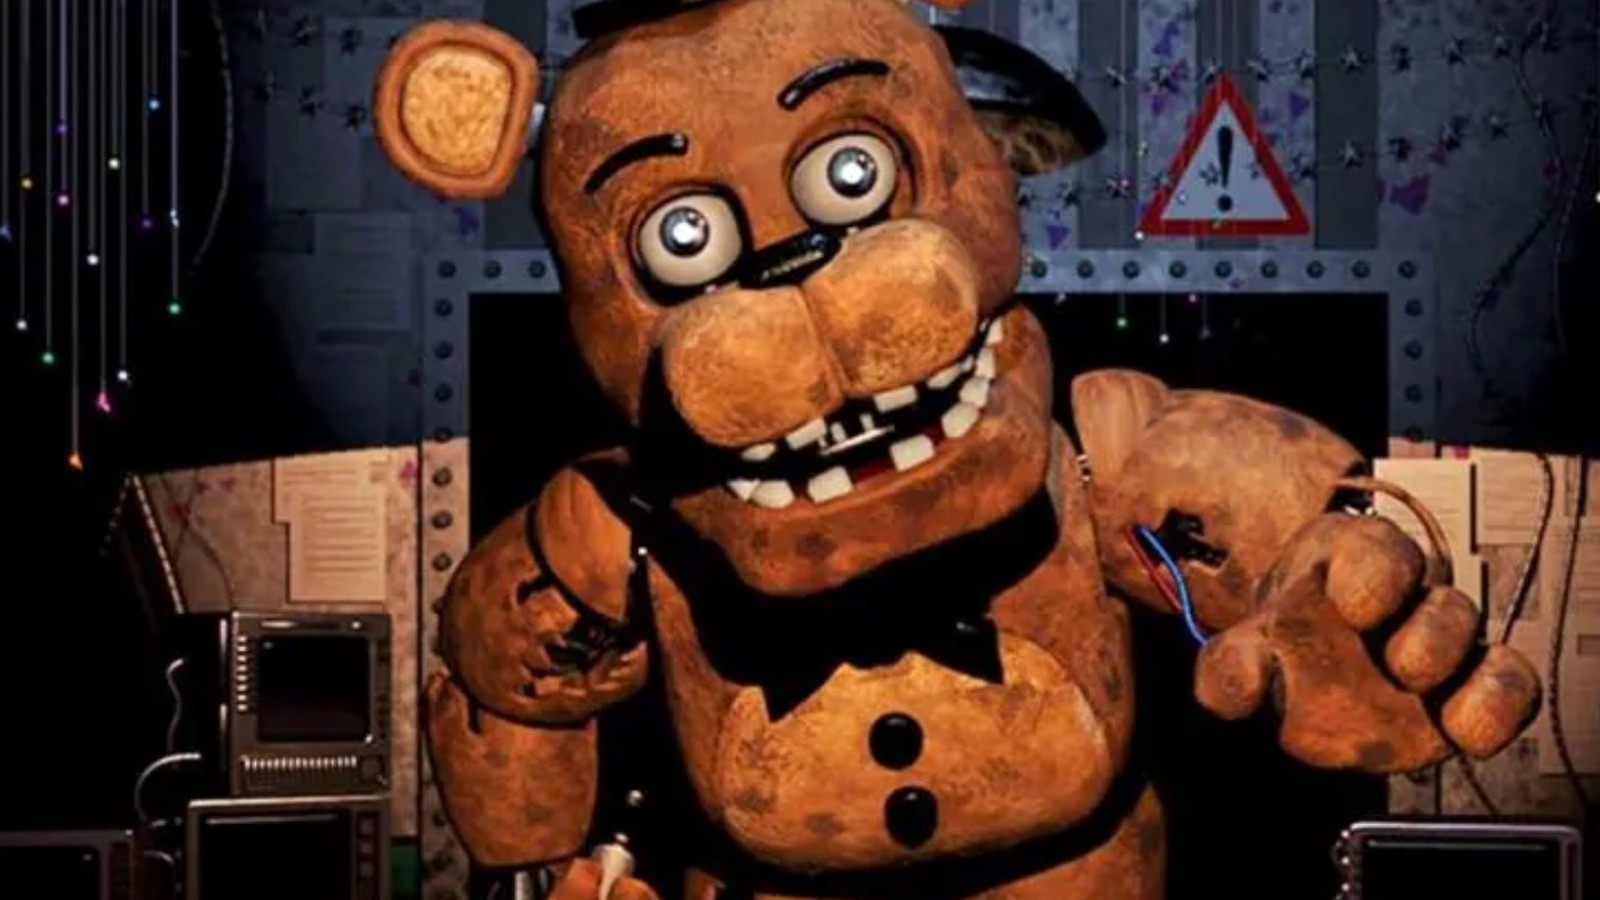 What Was the Bite of '87 in 'Five Nights at Freddy's?